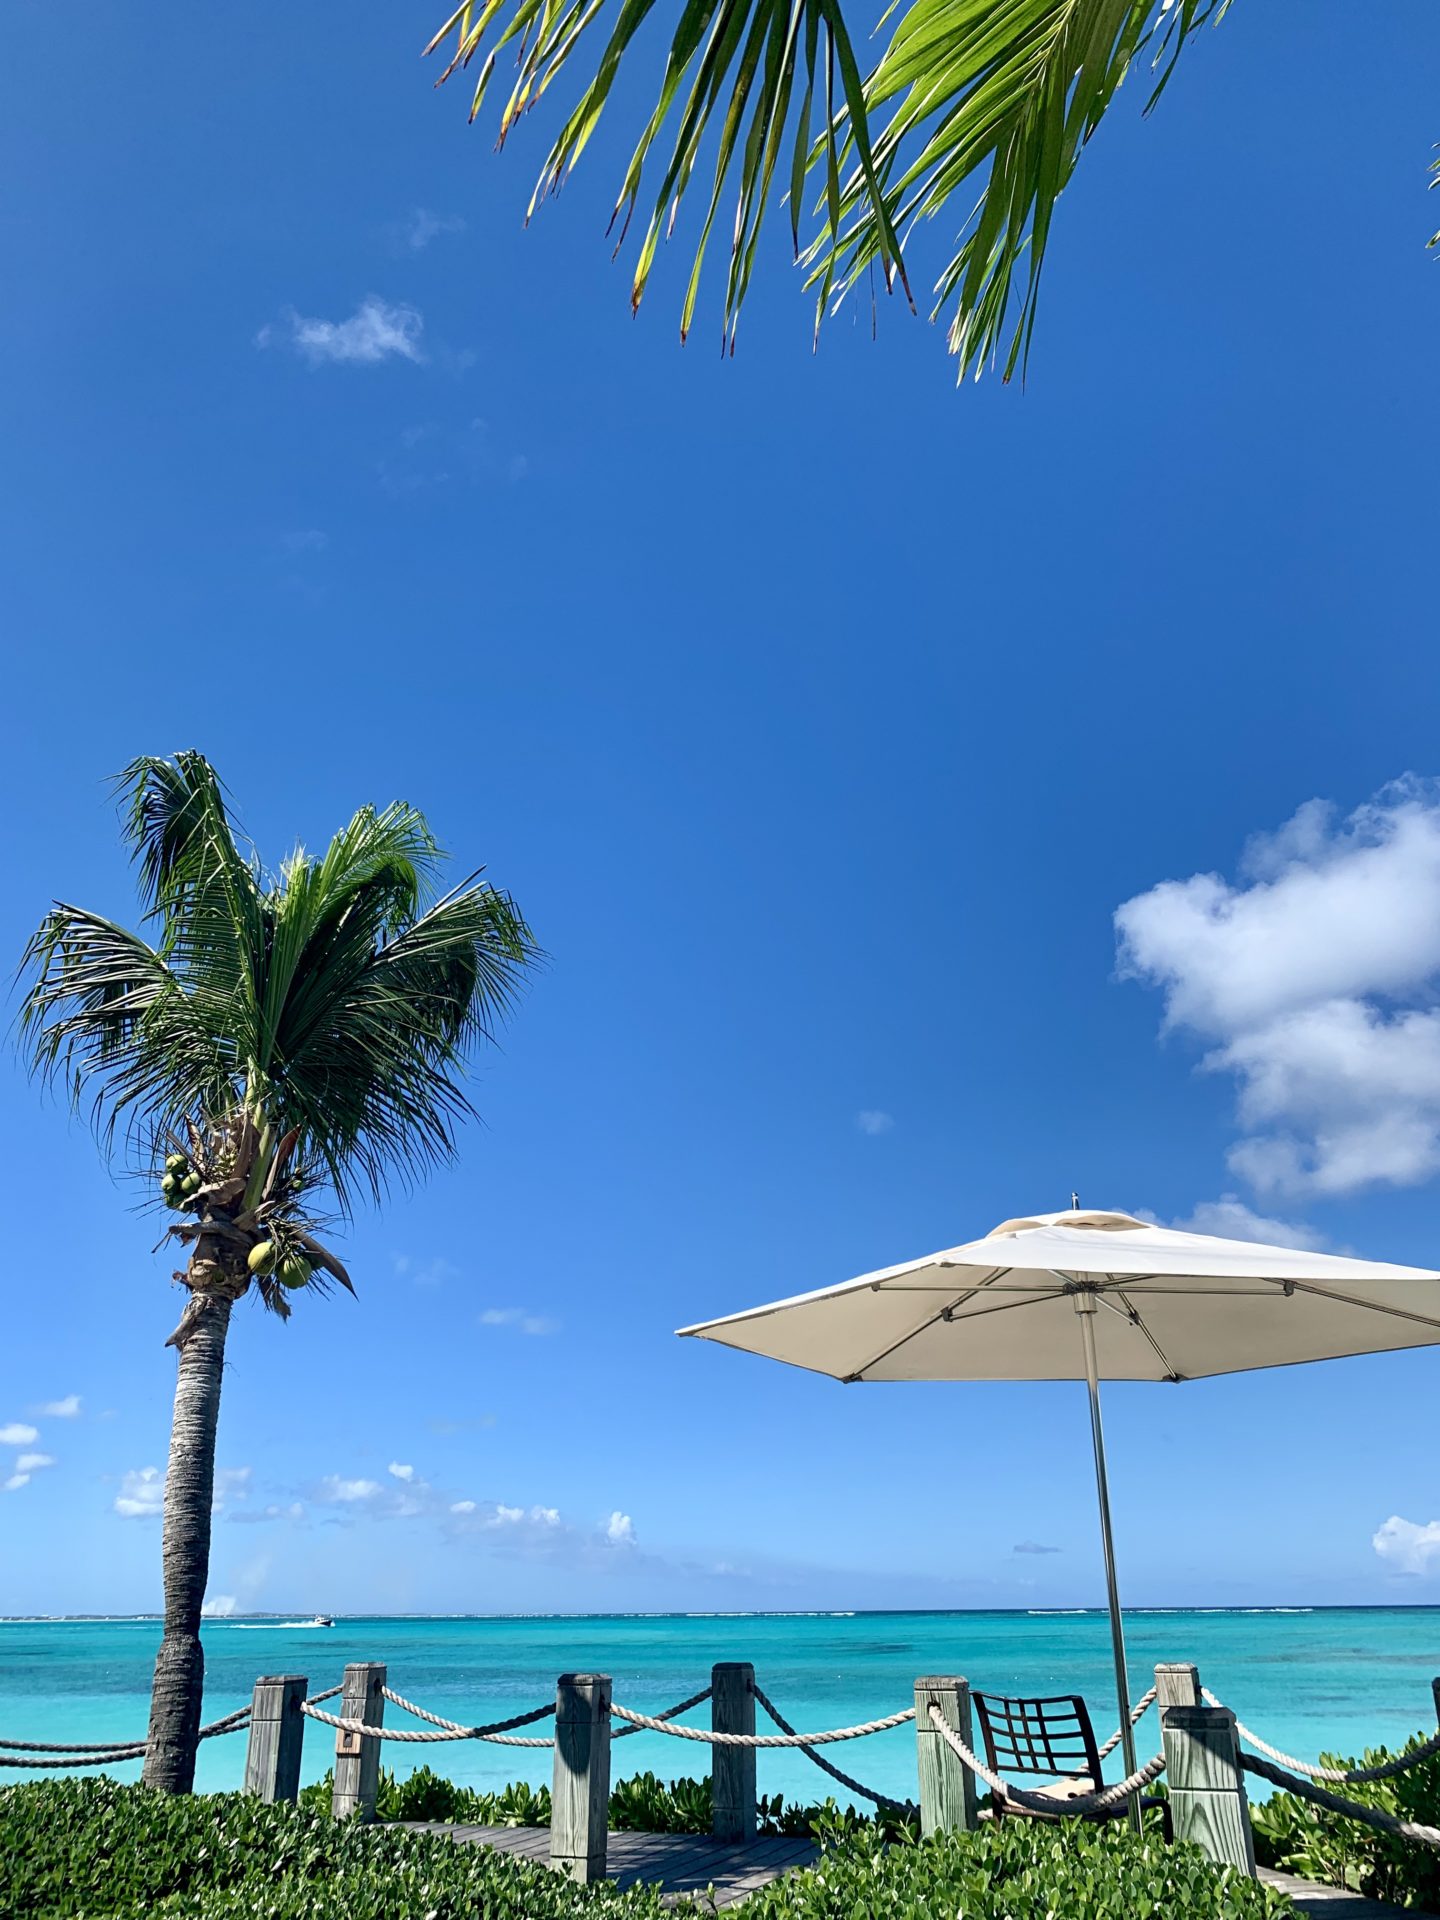 Turks and Caicos Island | Travel Guide